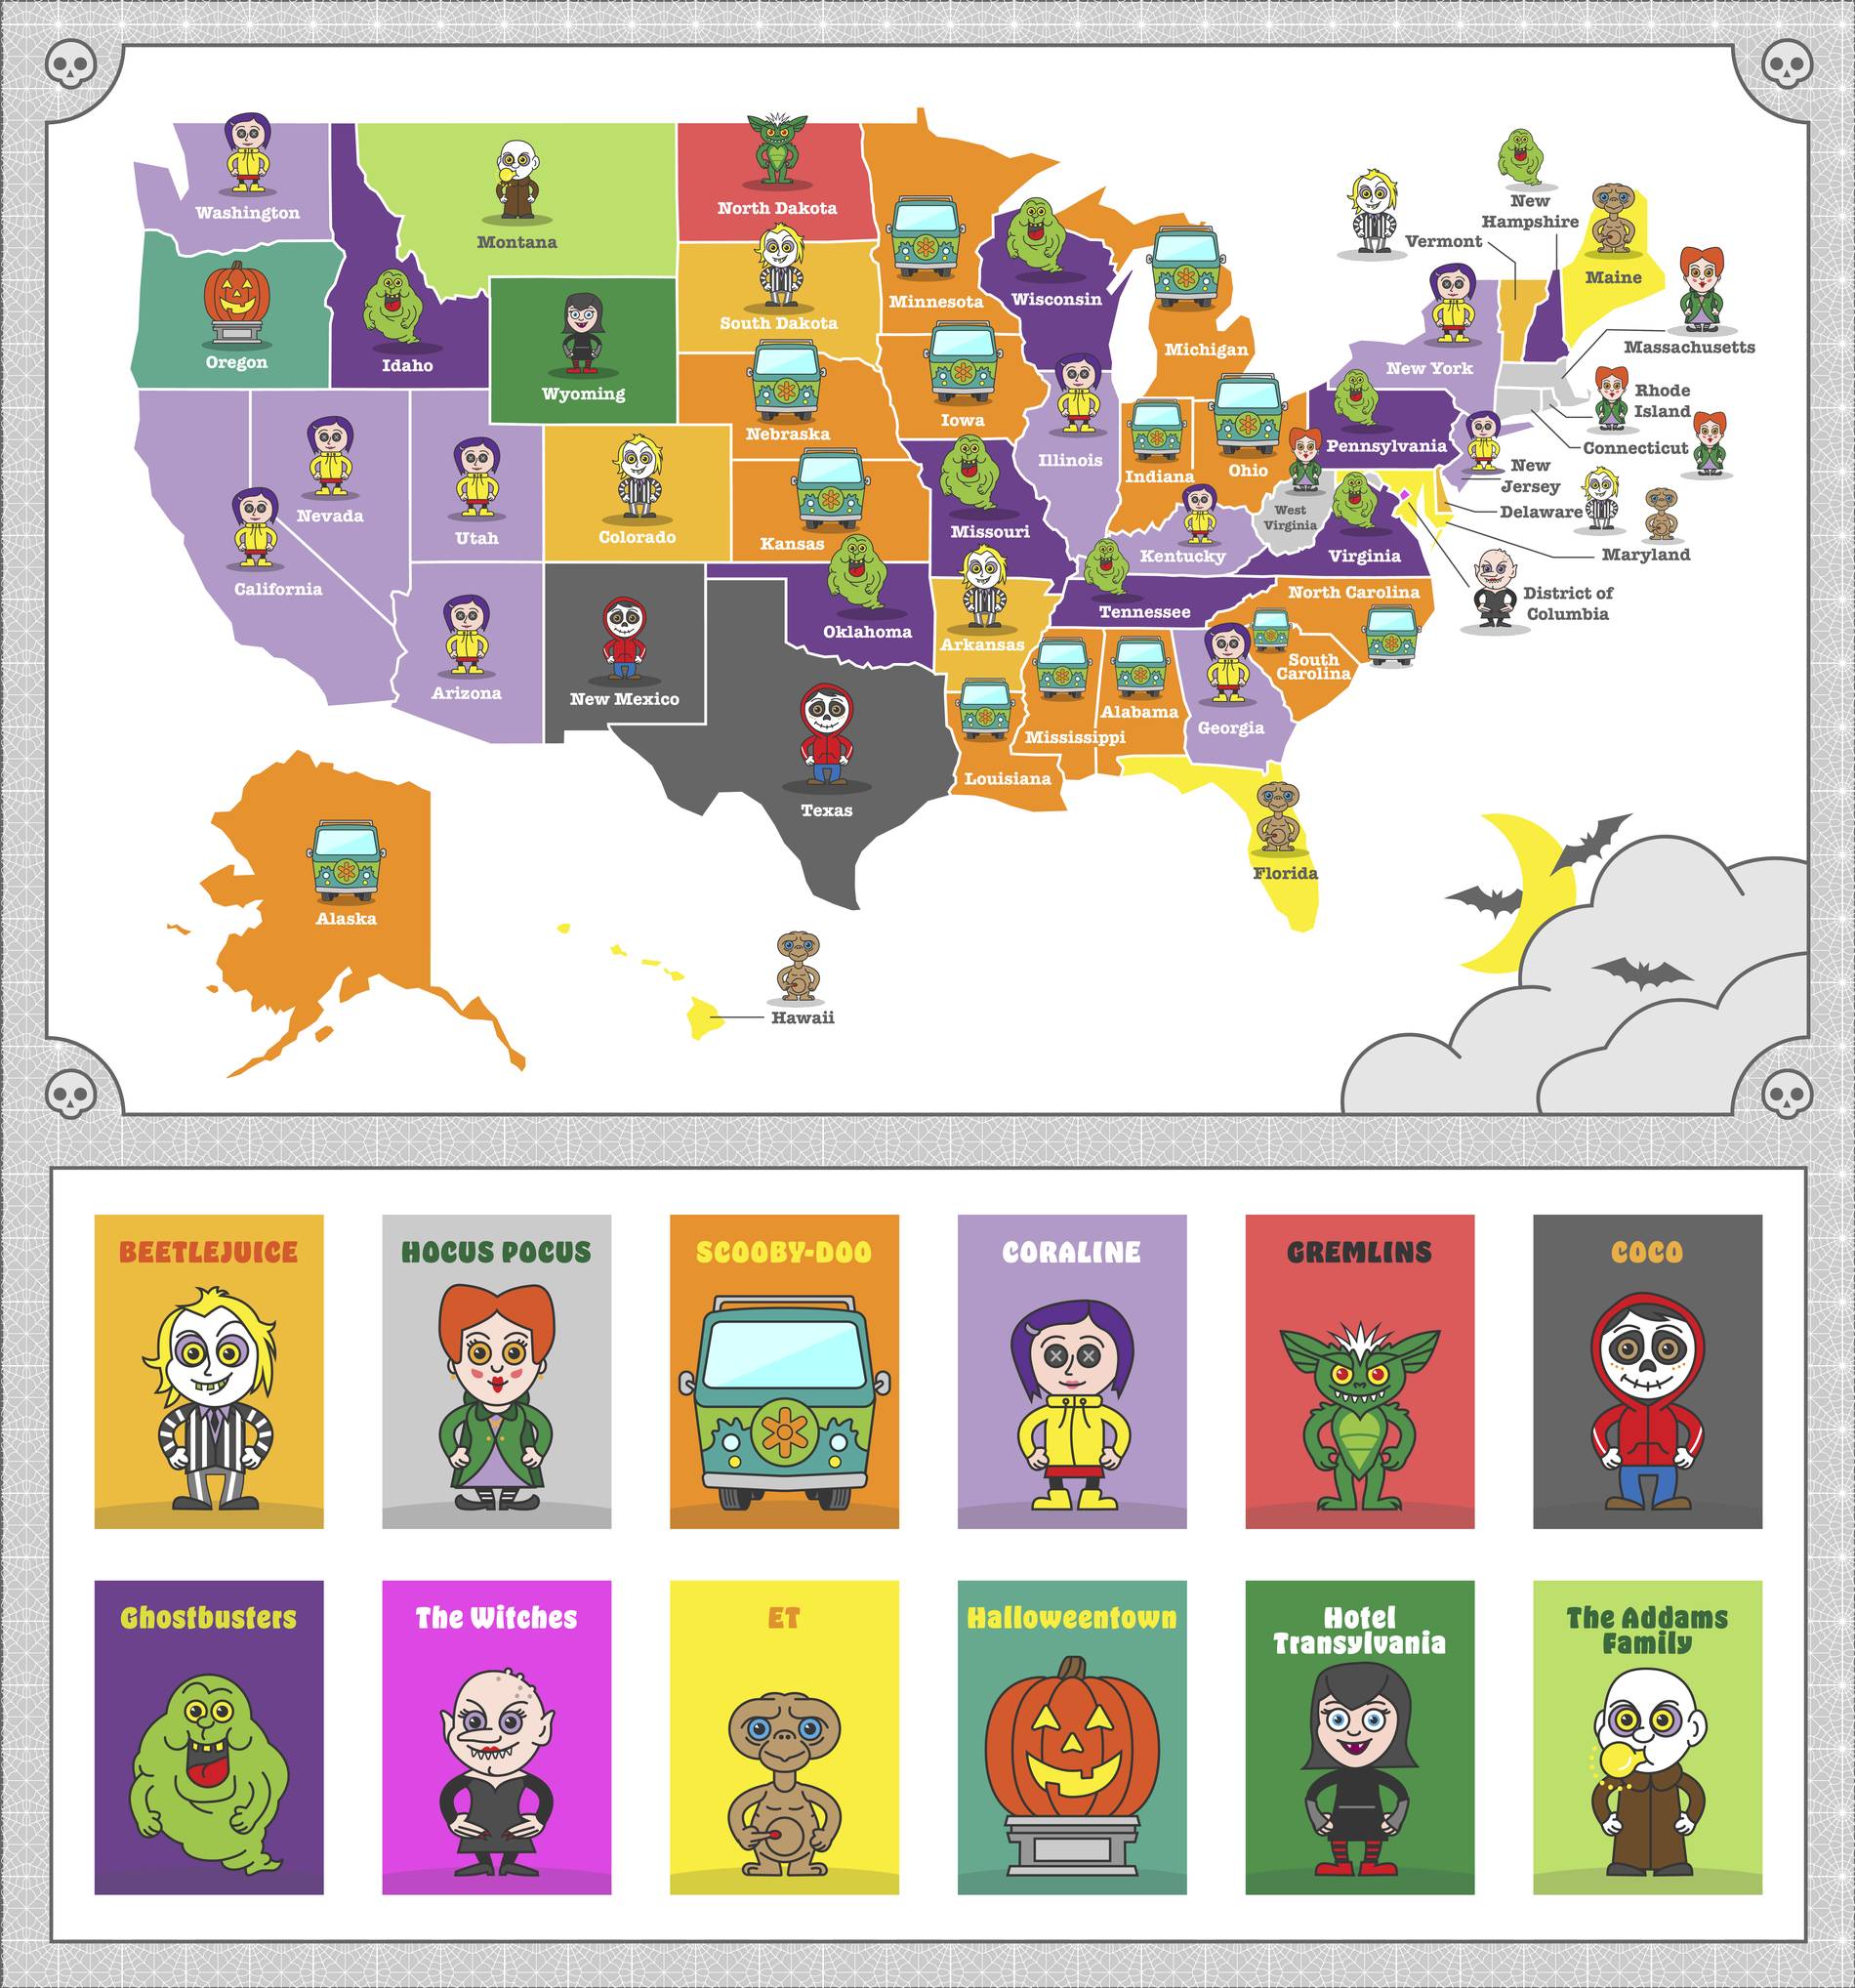 favorite kids Halloween movies by state 